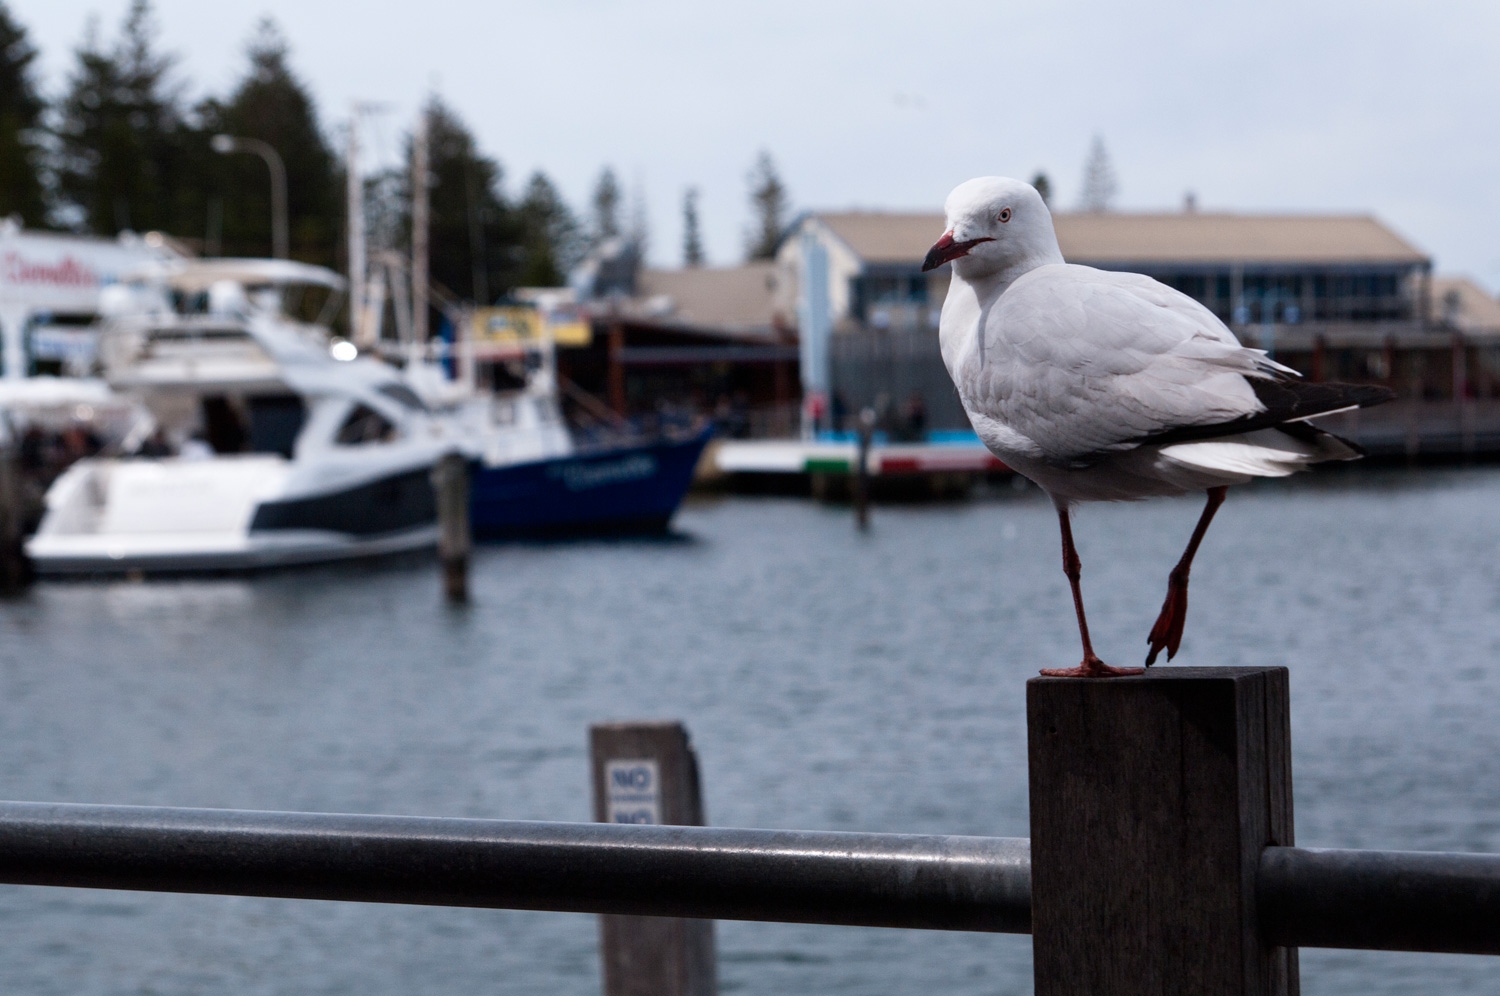 Seagull On The Pier